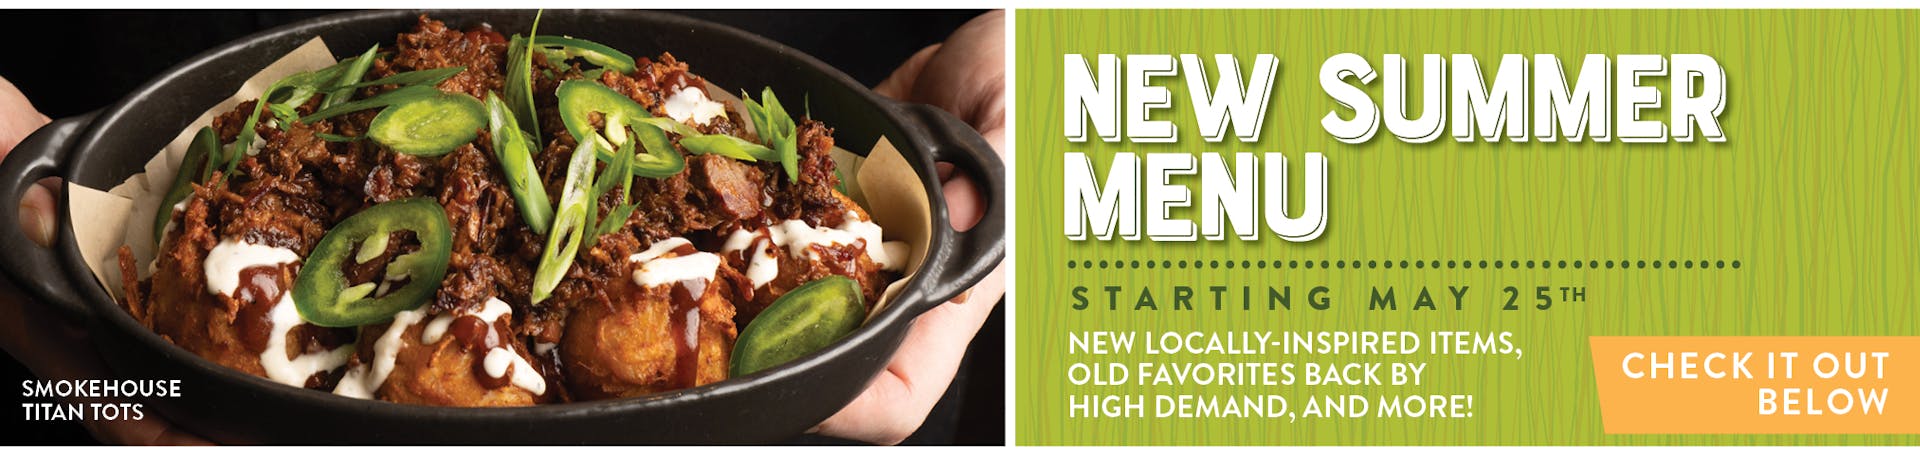 New Summer Menu Starting May 25th New Locally-inspired items, old favorites back by high demand, and more!